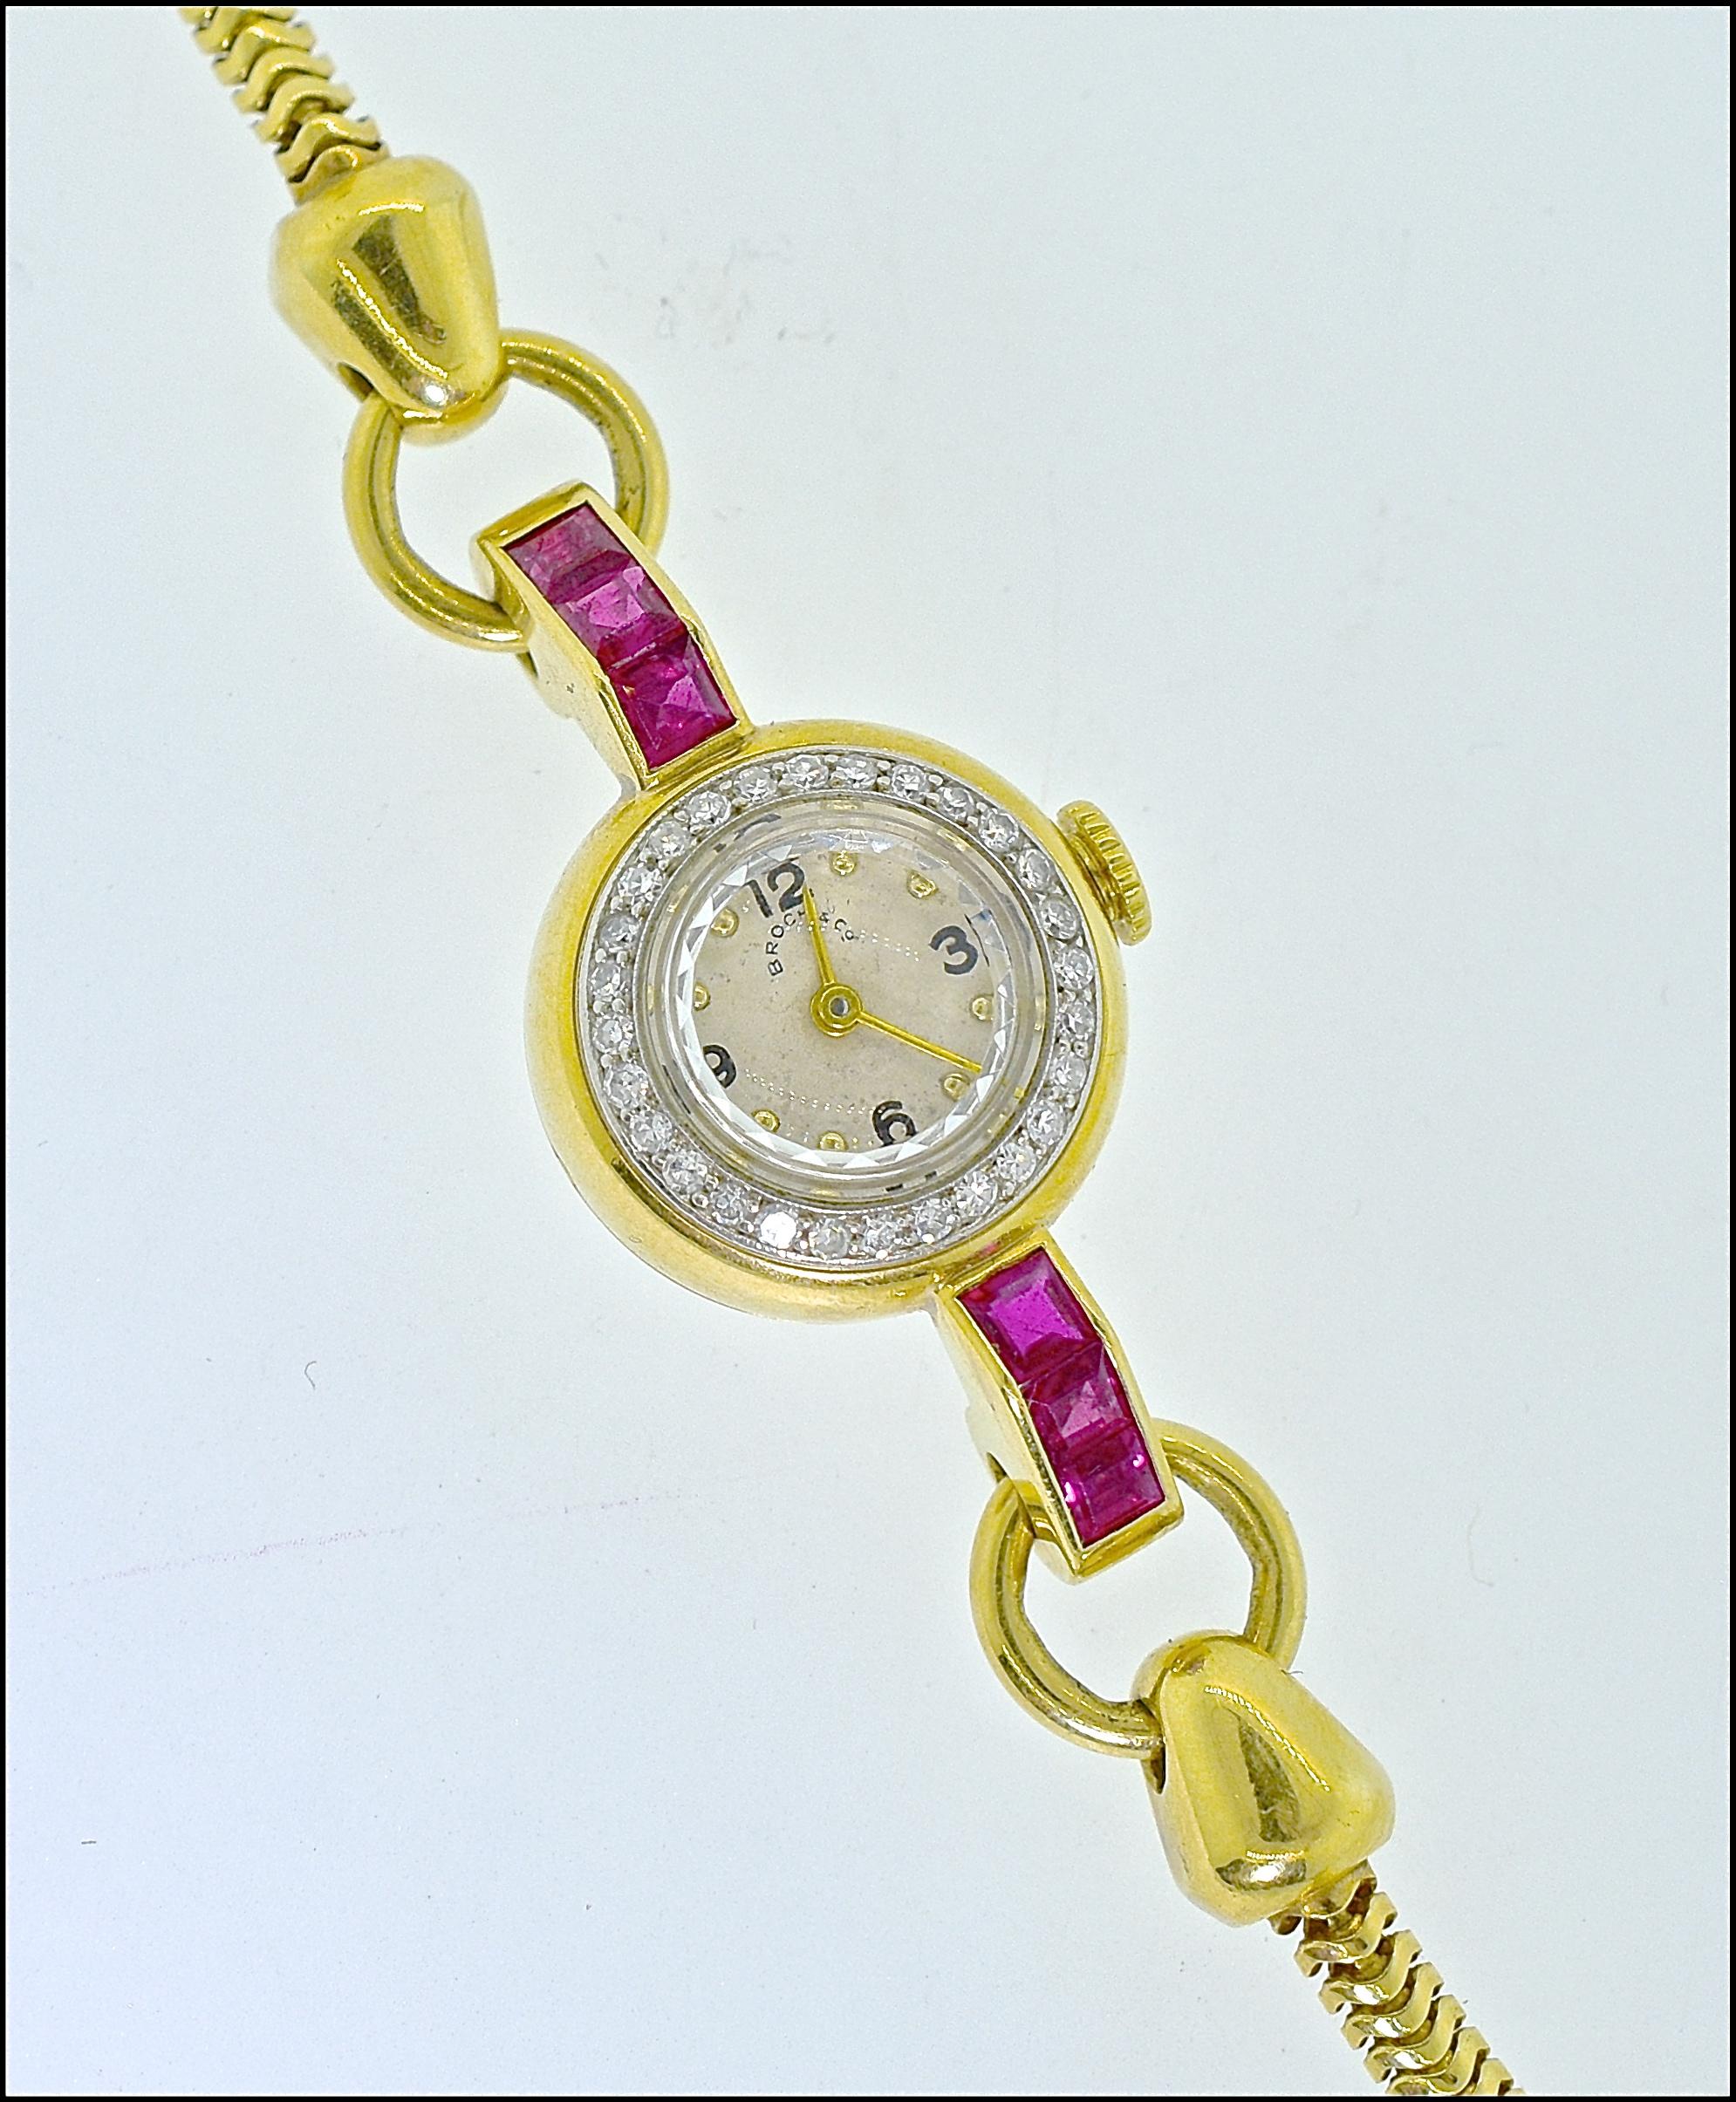 Retro vintage ladies wrist watch  by Brock, this watch   has a strong retro, Art Moderne, design. There are 6 fine natural rubies, probably unheated Burma stones, as evident of their fine  color.  There are diamonds surrounding the diamond.  The 17